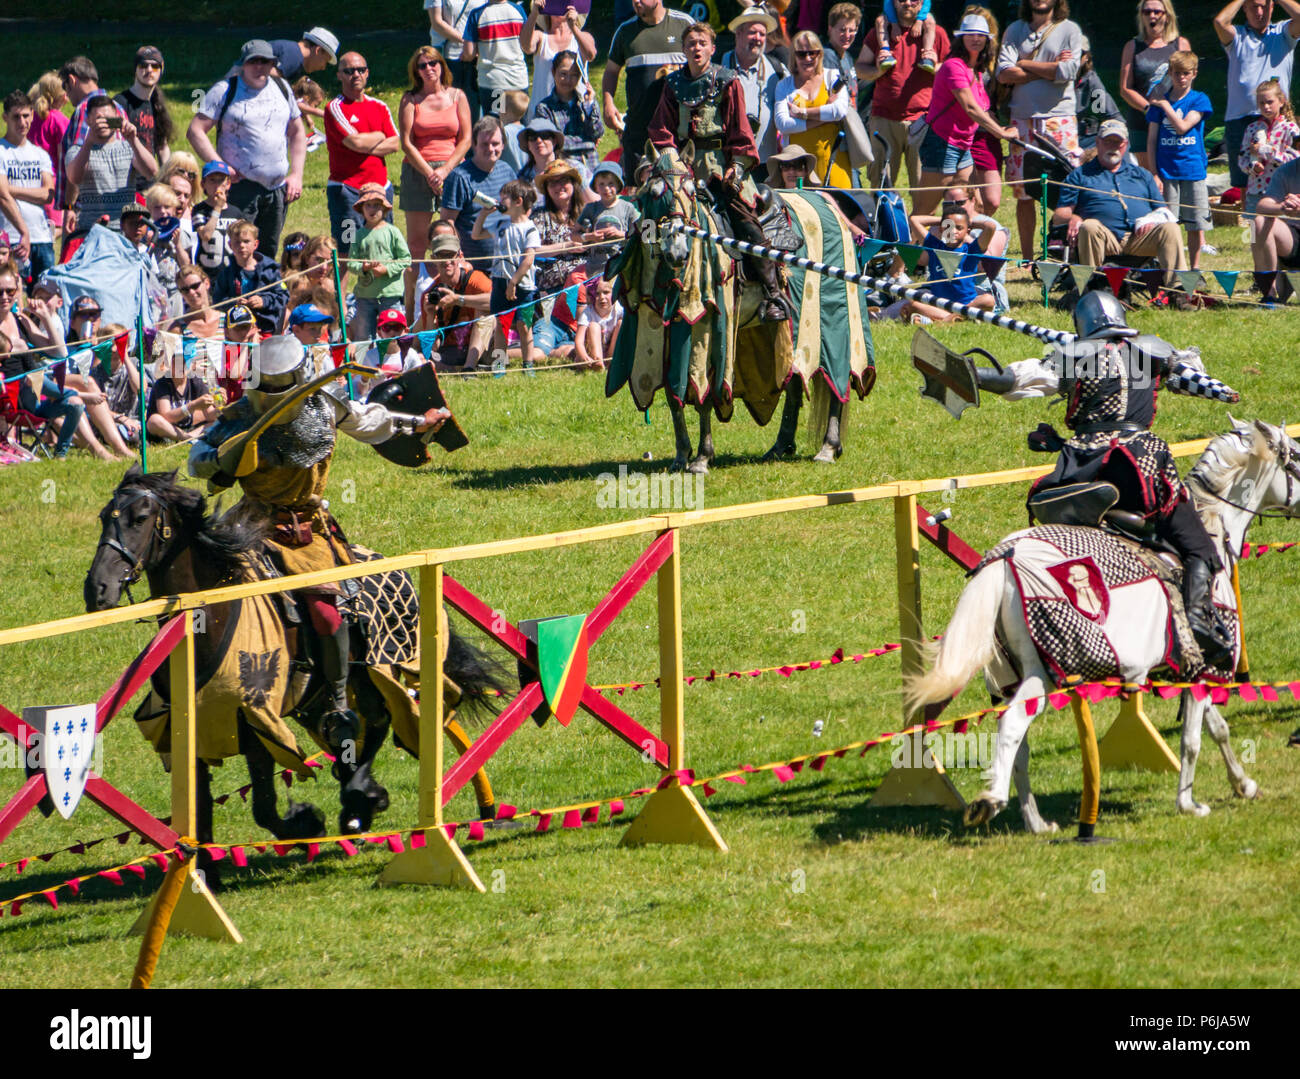 Jousting and Medieval Fair at Linlithgow Palace, Linlithgow, Scotland, United Kingdom, 30th June 2018. Historic Environment Scotland kick off their summer entertainment programme with a fabulous display of Medieval jousting in the grounds of the historic castle. The family fun day includes jousting performed by Les Amis D'Onno equine stunt team. Knight joust with lances Stock Photo